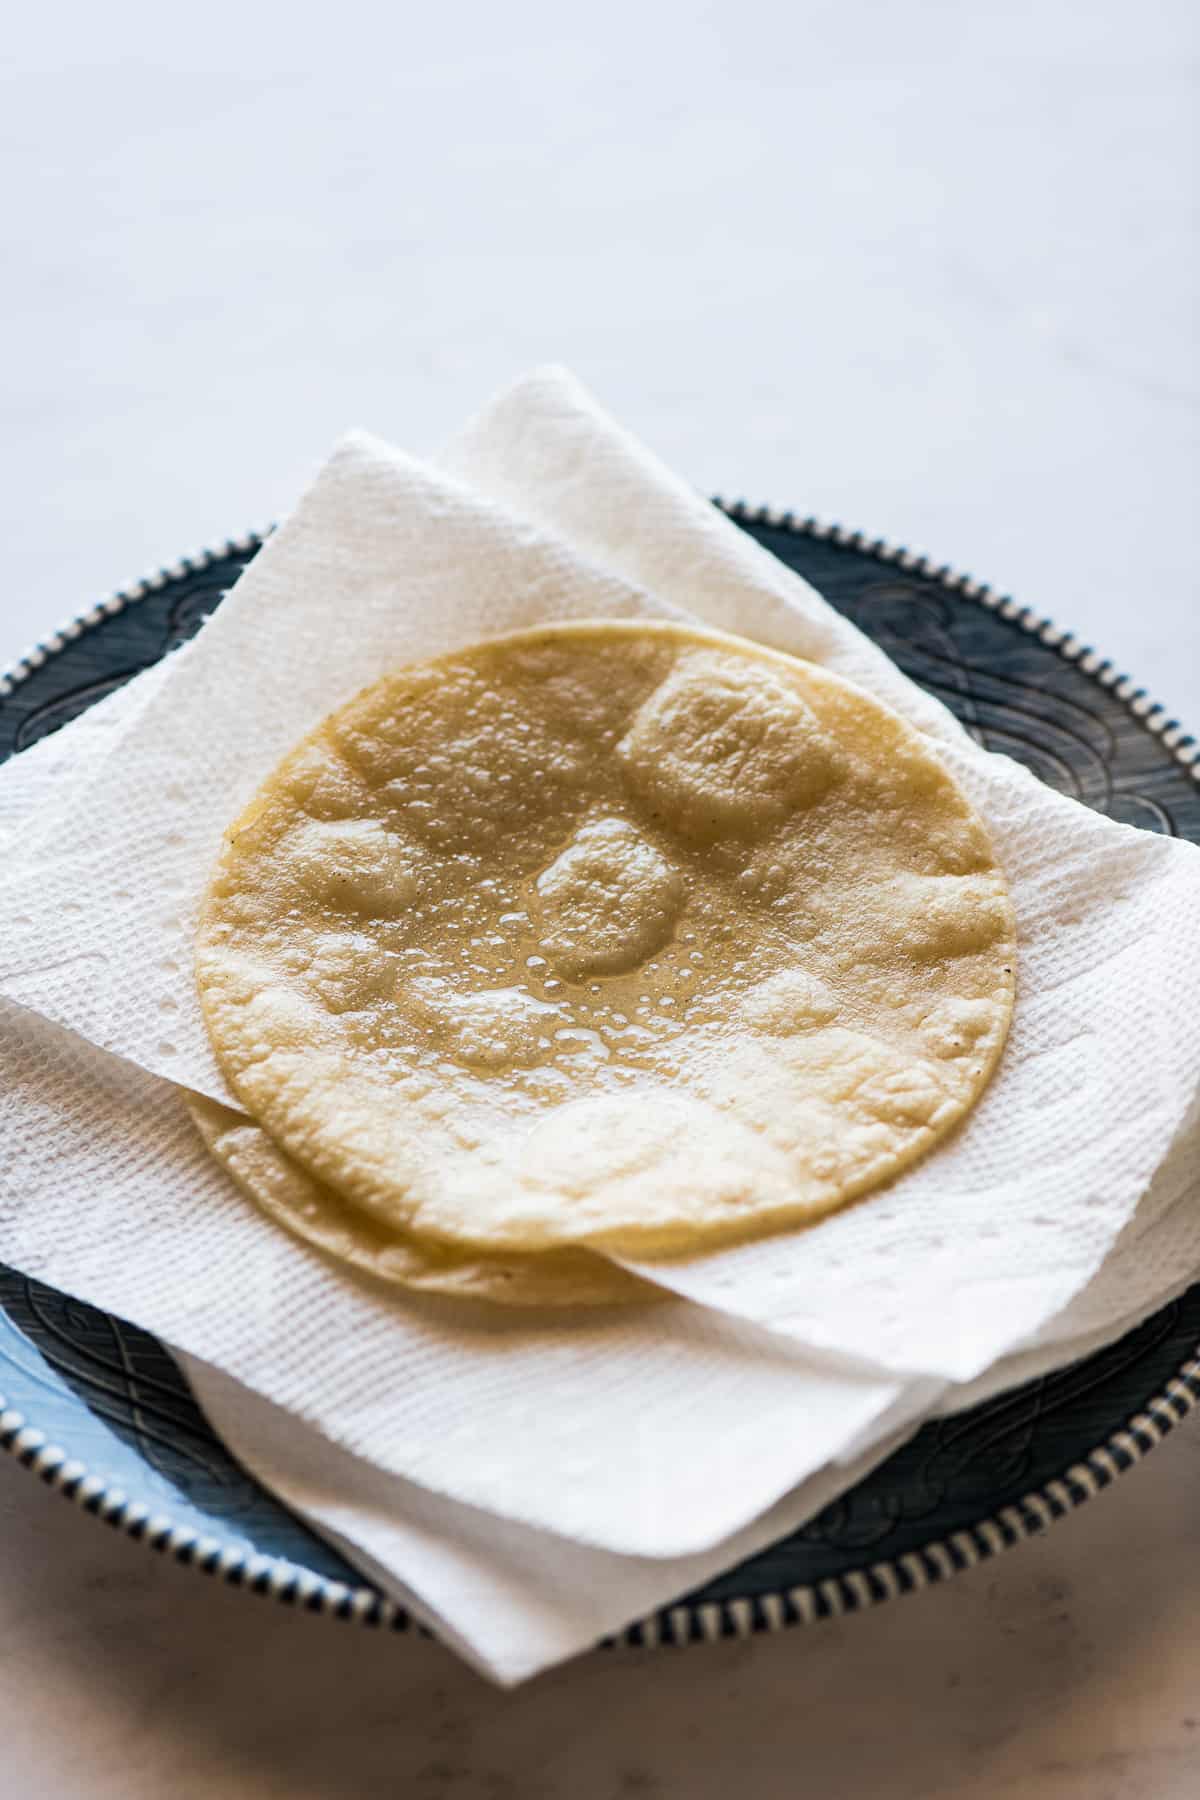 Fried corn tortillas draining on a plate with paper towels.